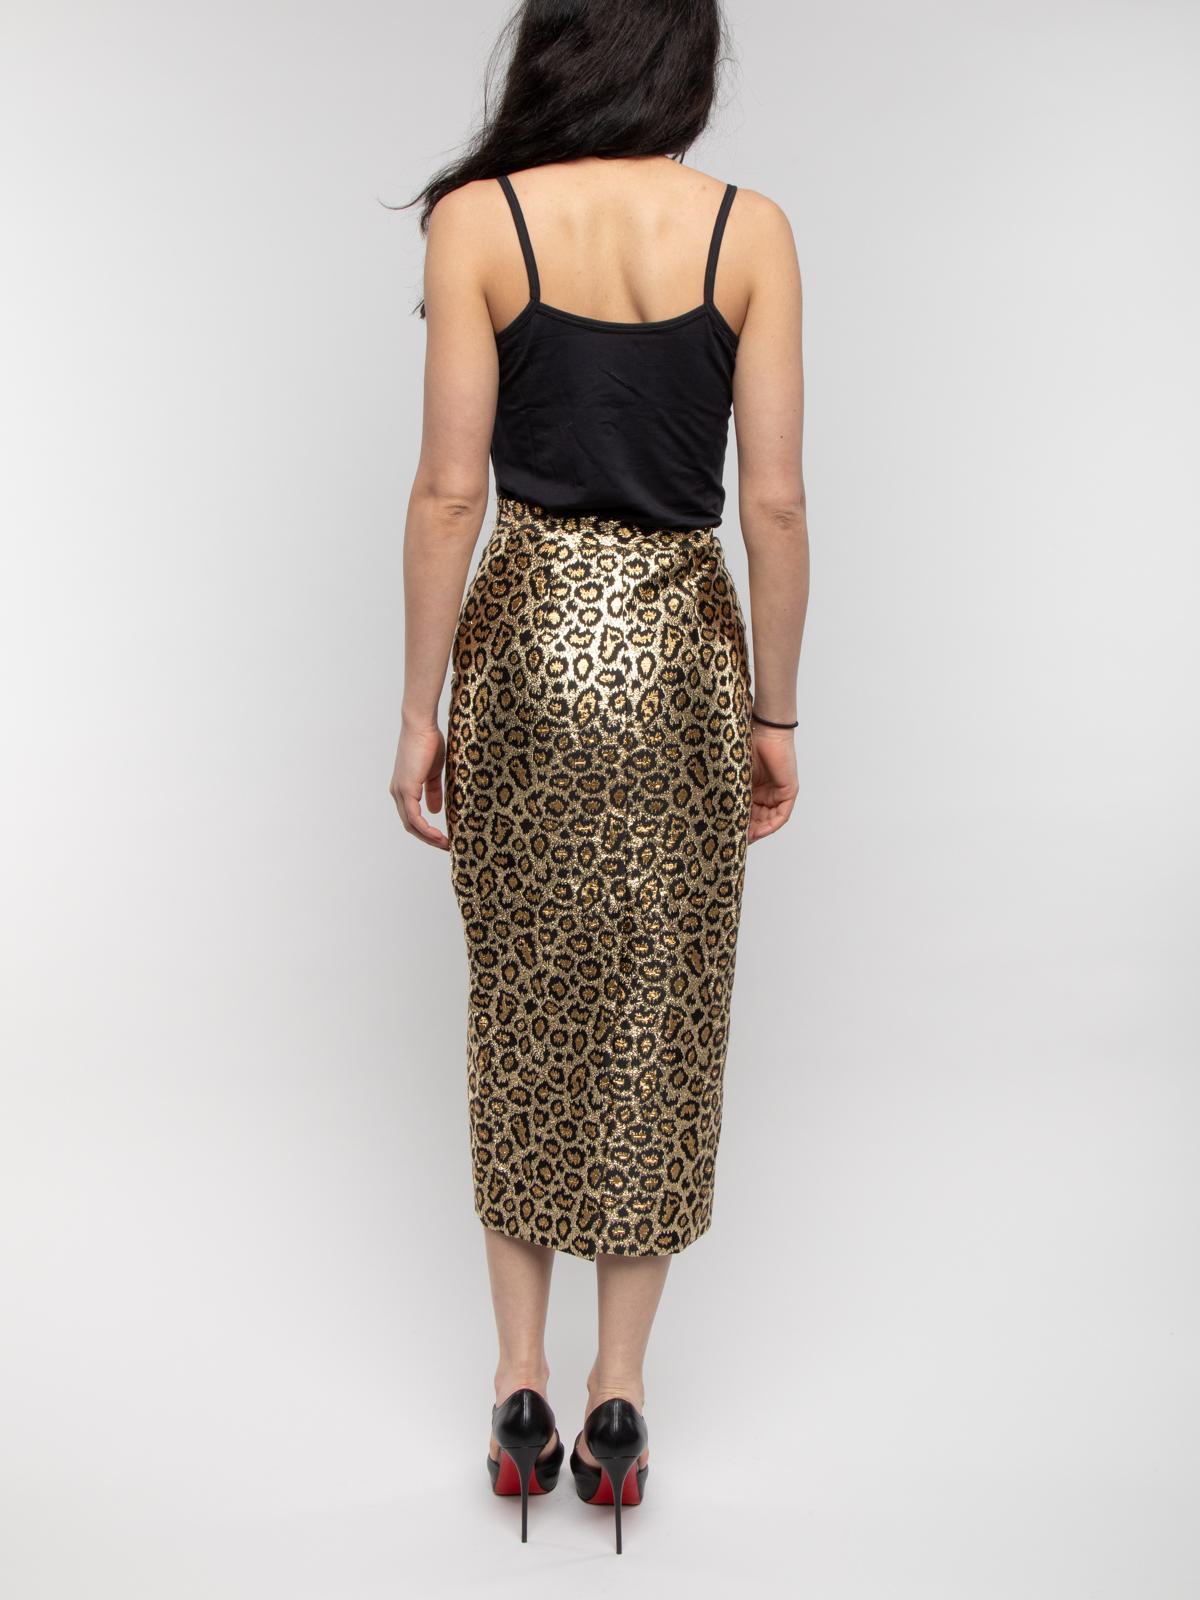 Pre-Loved Alessandra Rich Women's Leopard Print with Metallic Thread Pencil In Good Condition In London, GB